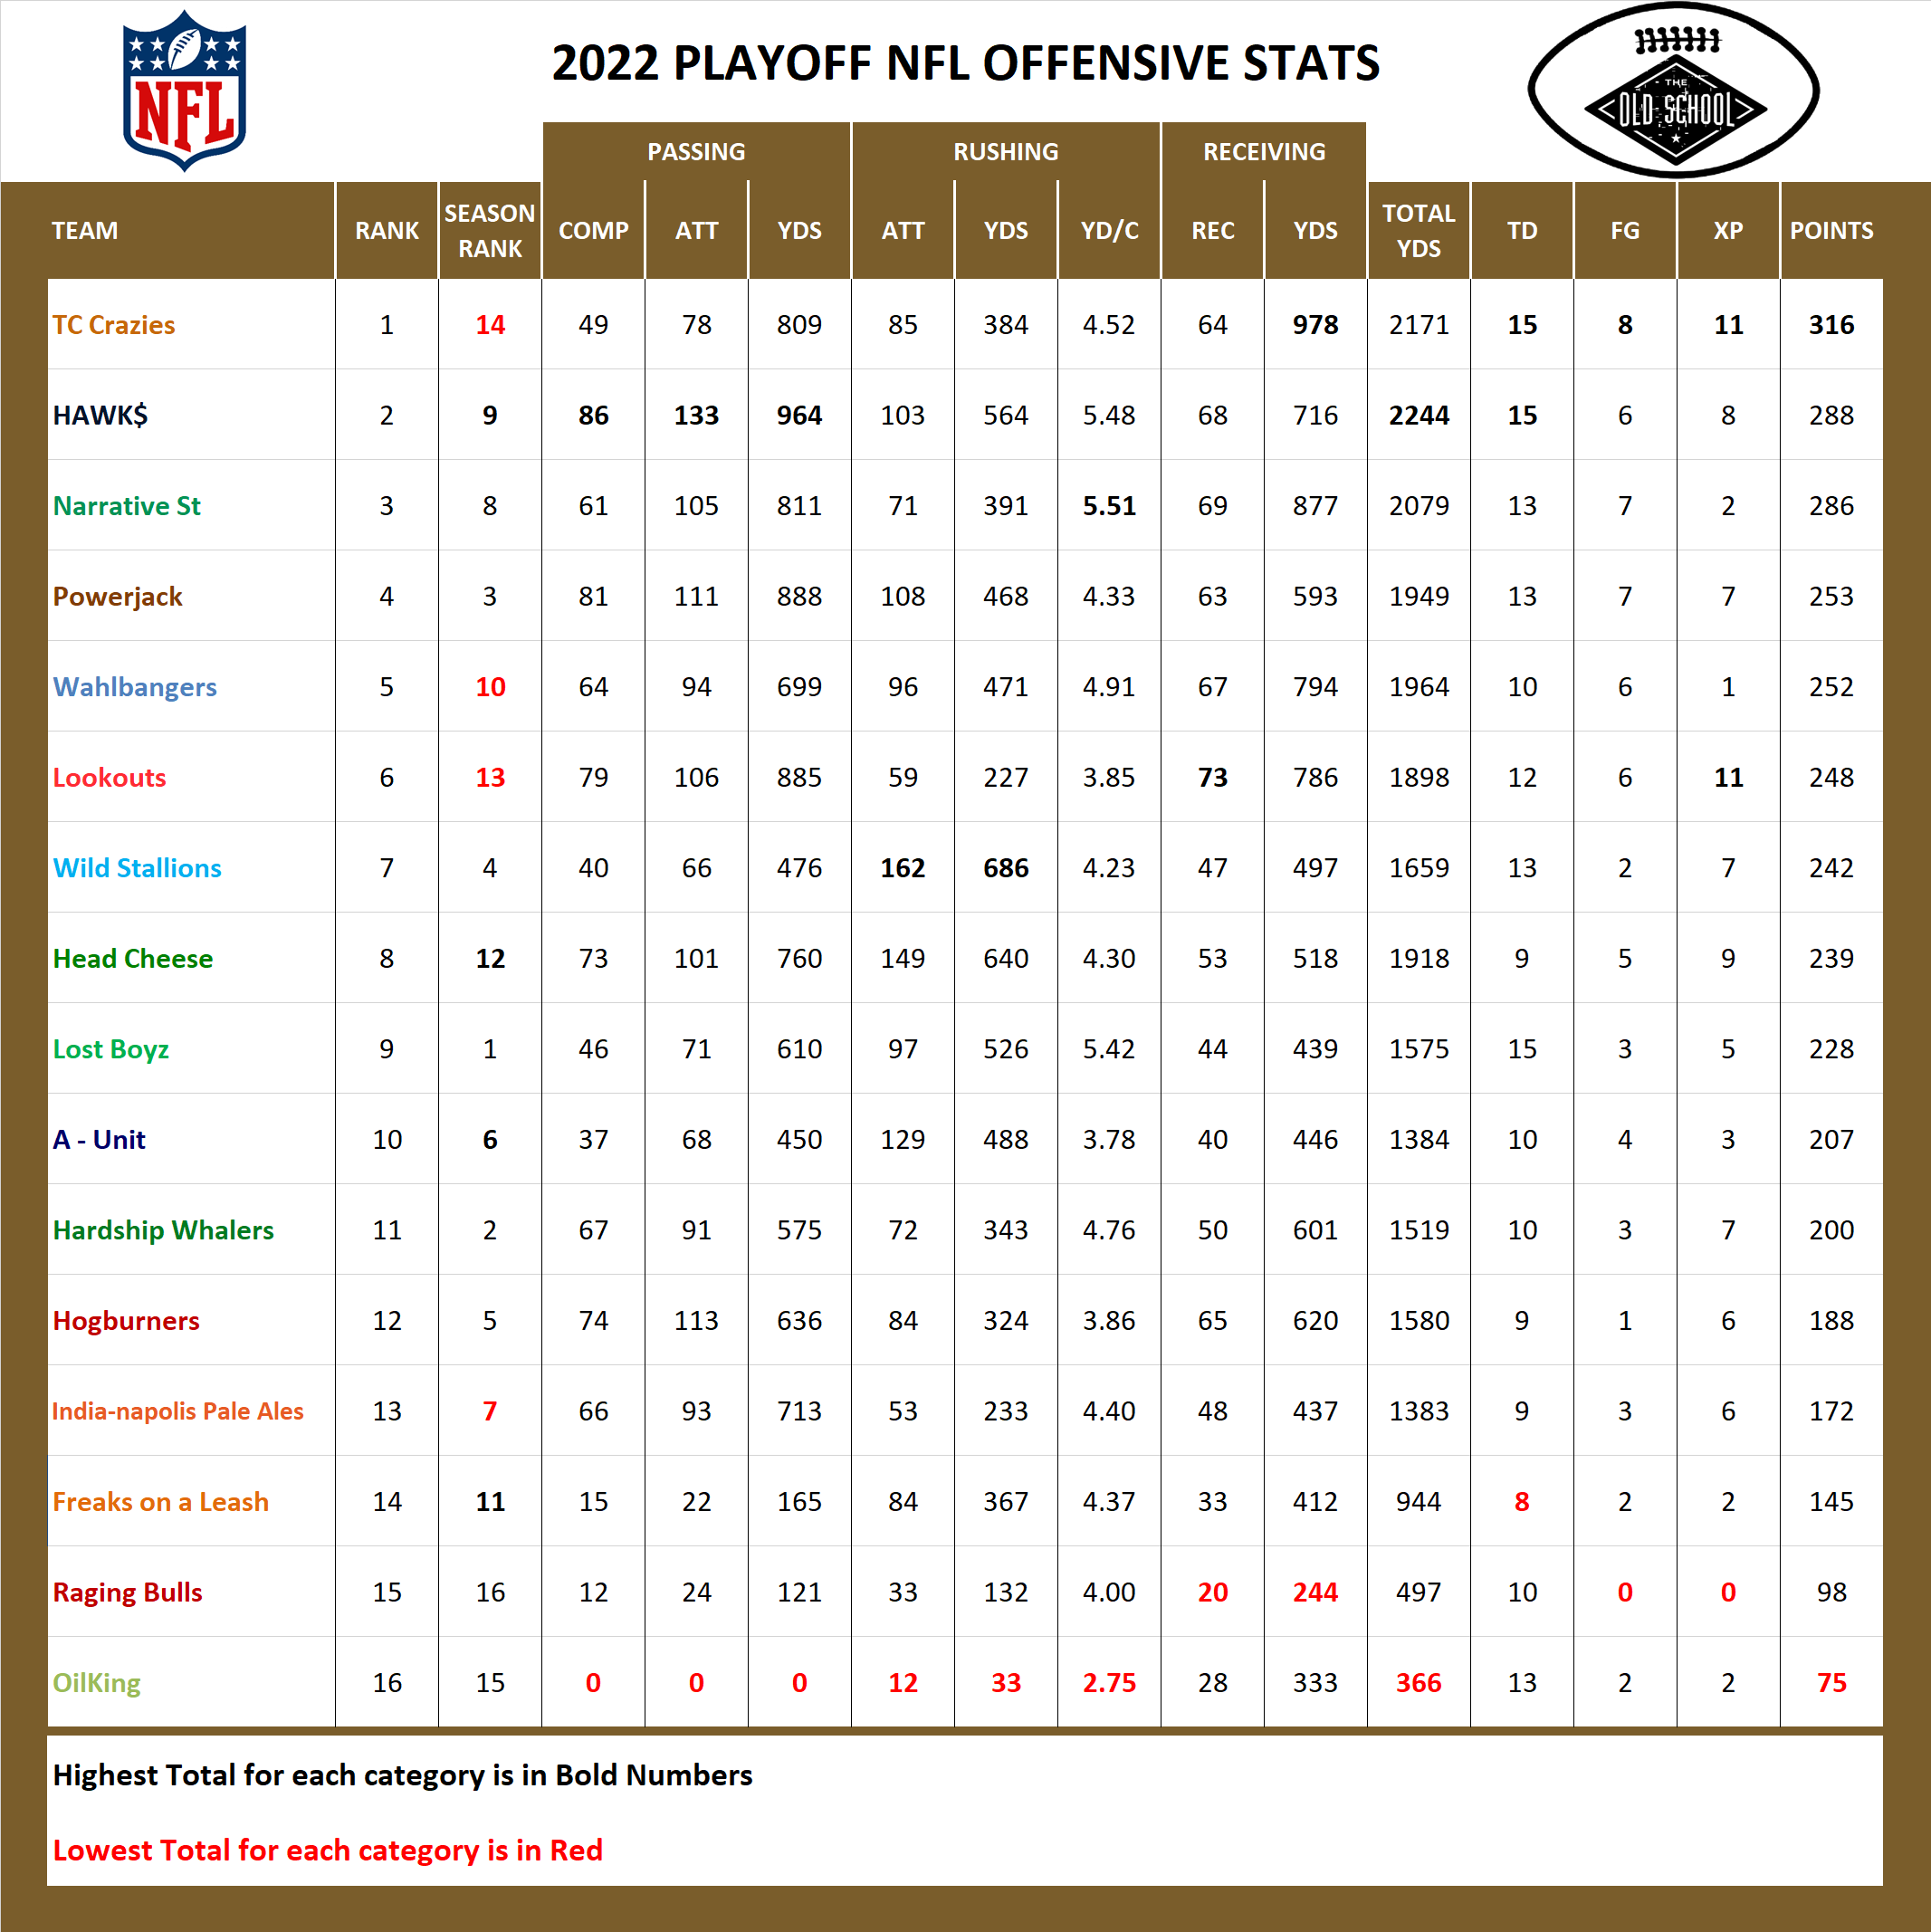 2022 National Football League Pool Playoff Offensive Stats